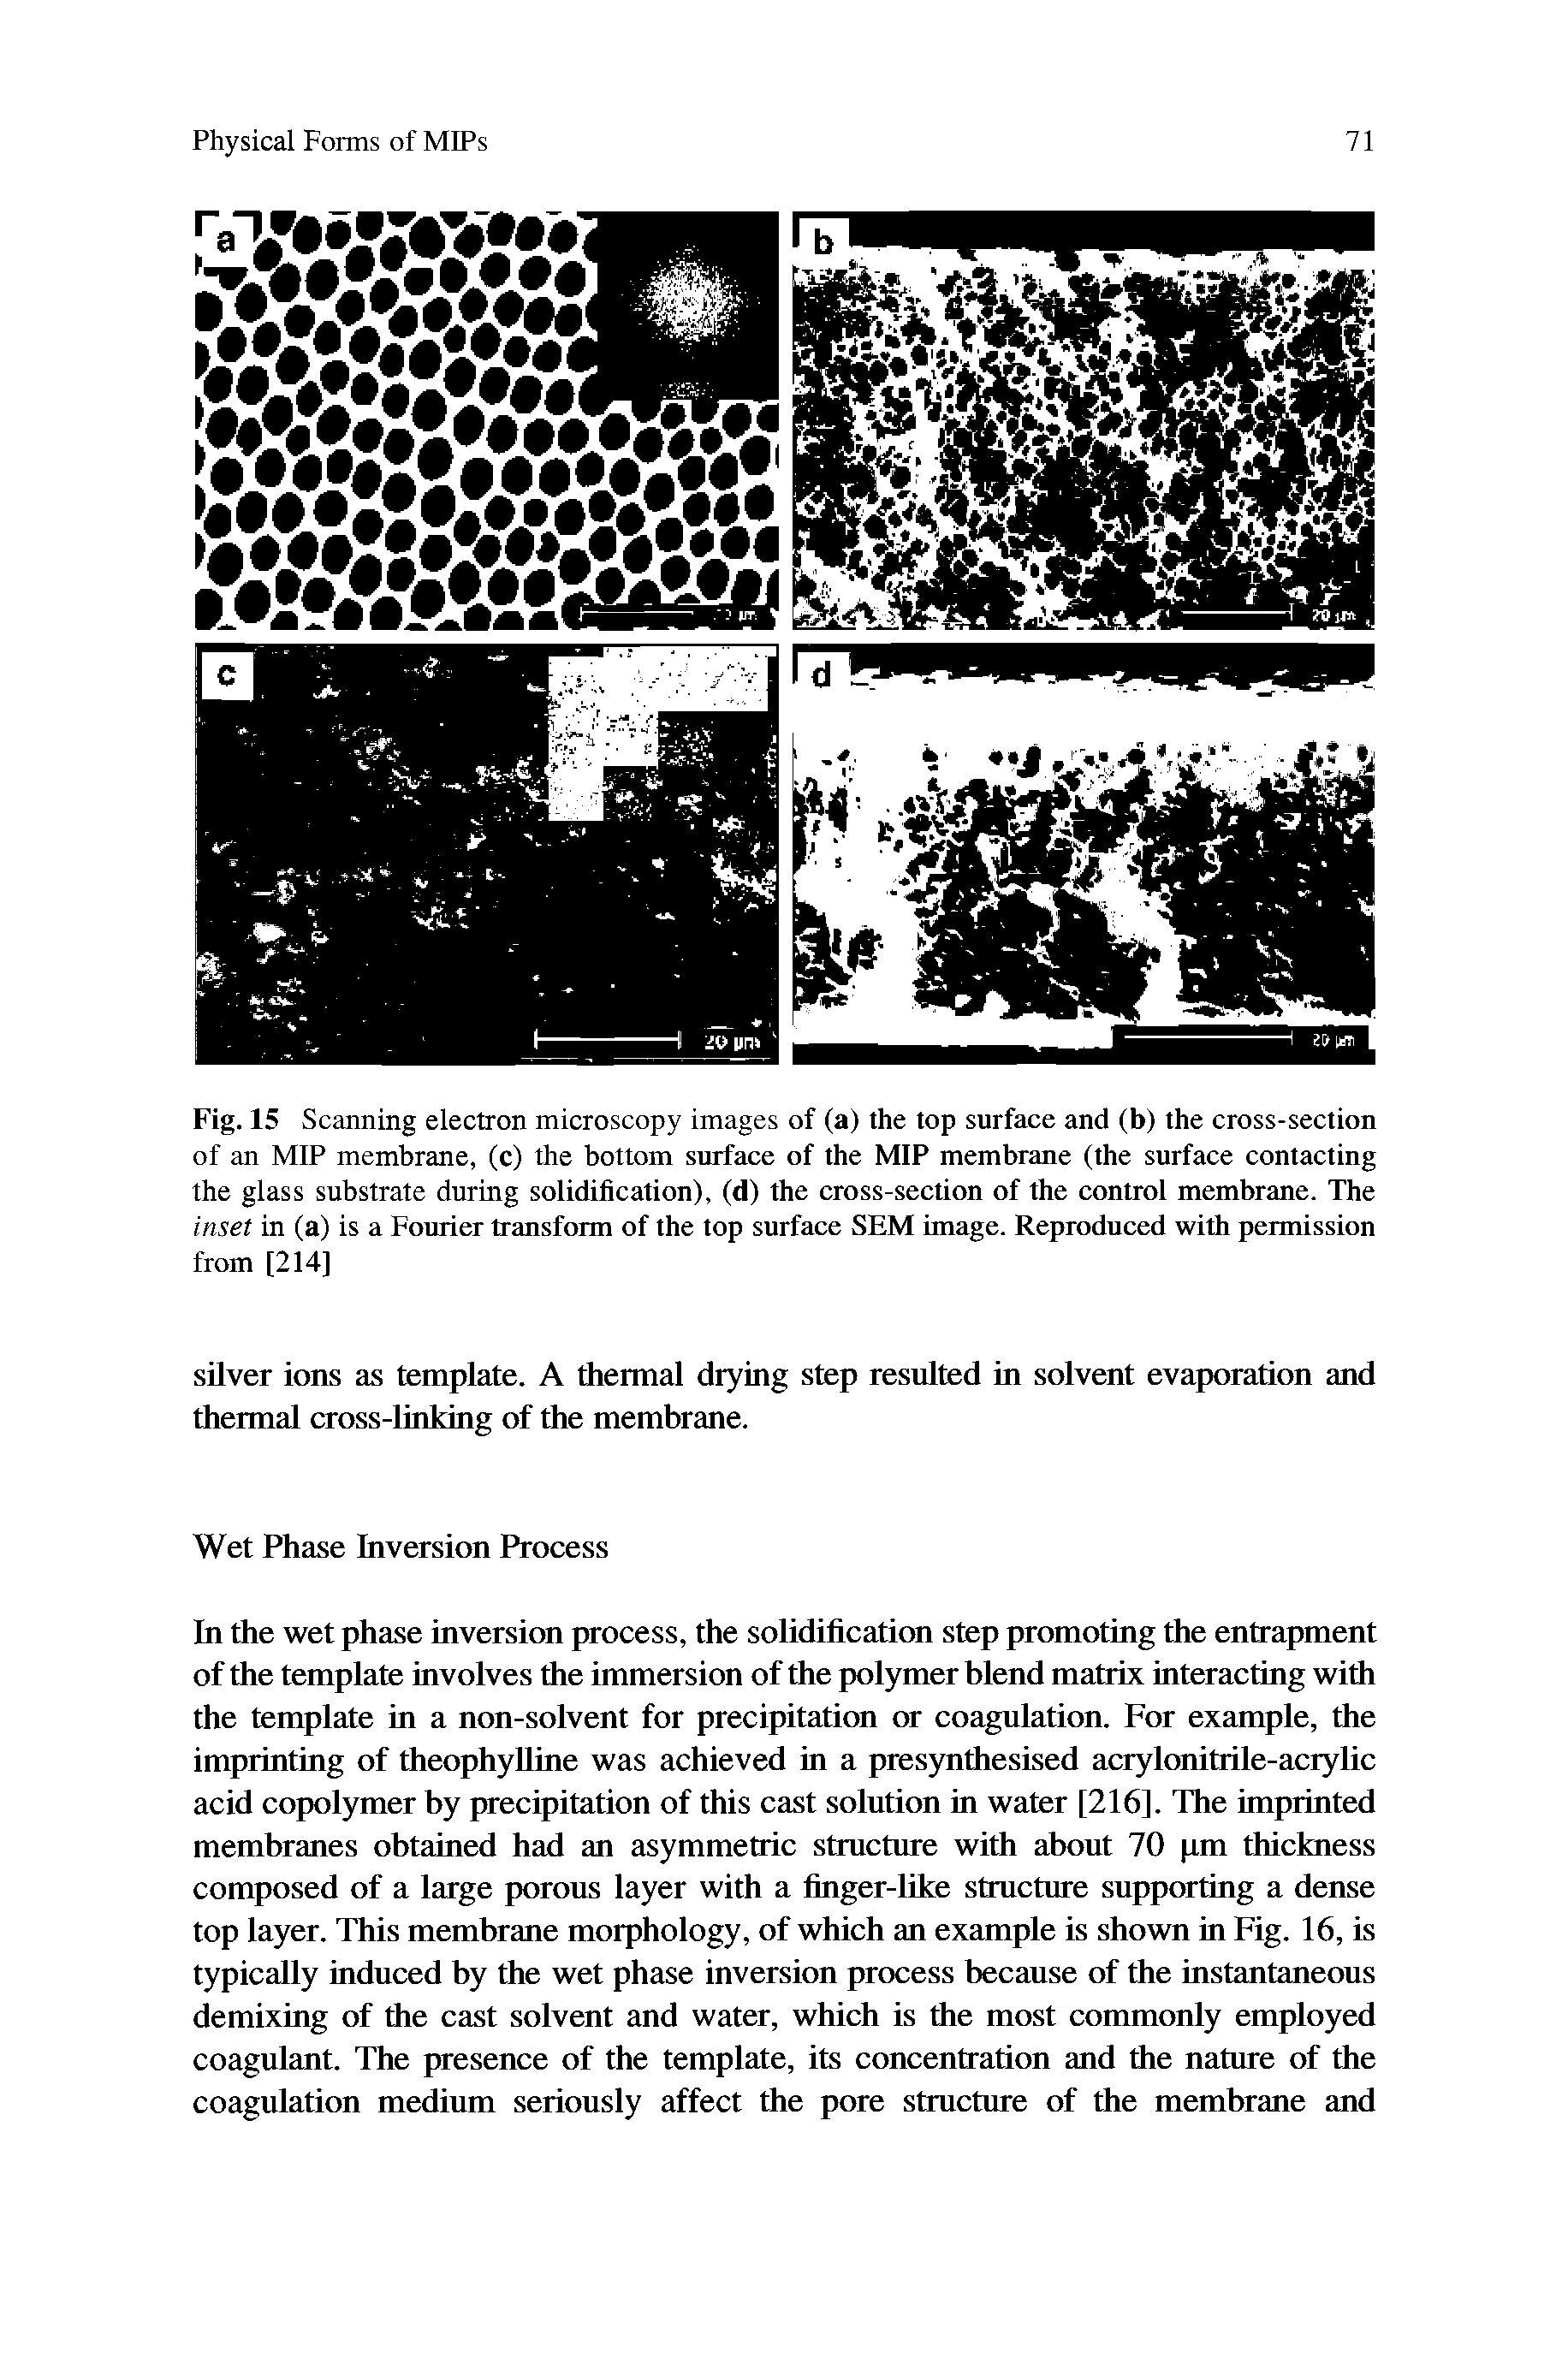 Fig. 15 Scanning electron microscopy images of (a) the top surface and (b) the cross-section of an MIP membrane, (c) the bottom surface of the MIP membrane (the surface contacting the glass substrate during solidification), (d) the cross-section of the control membrane. The inset in (a) is a Fourier transform of the top surface SEM image. Reproduced with permission from [214]...